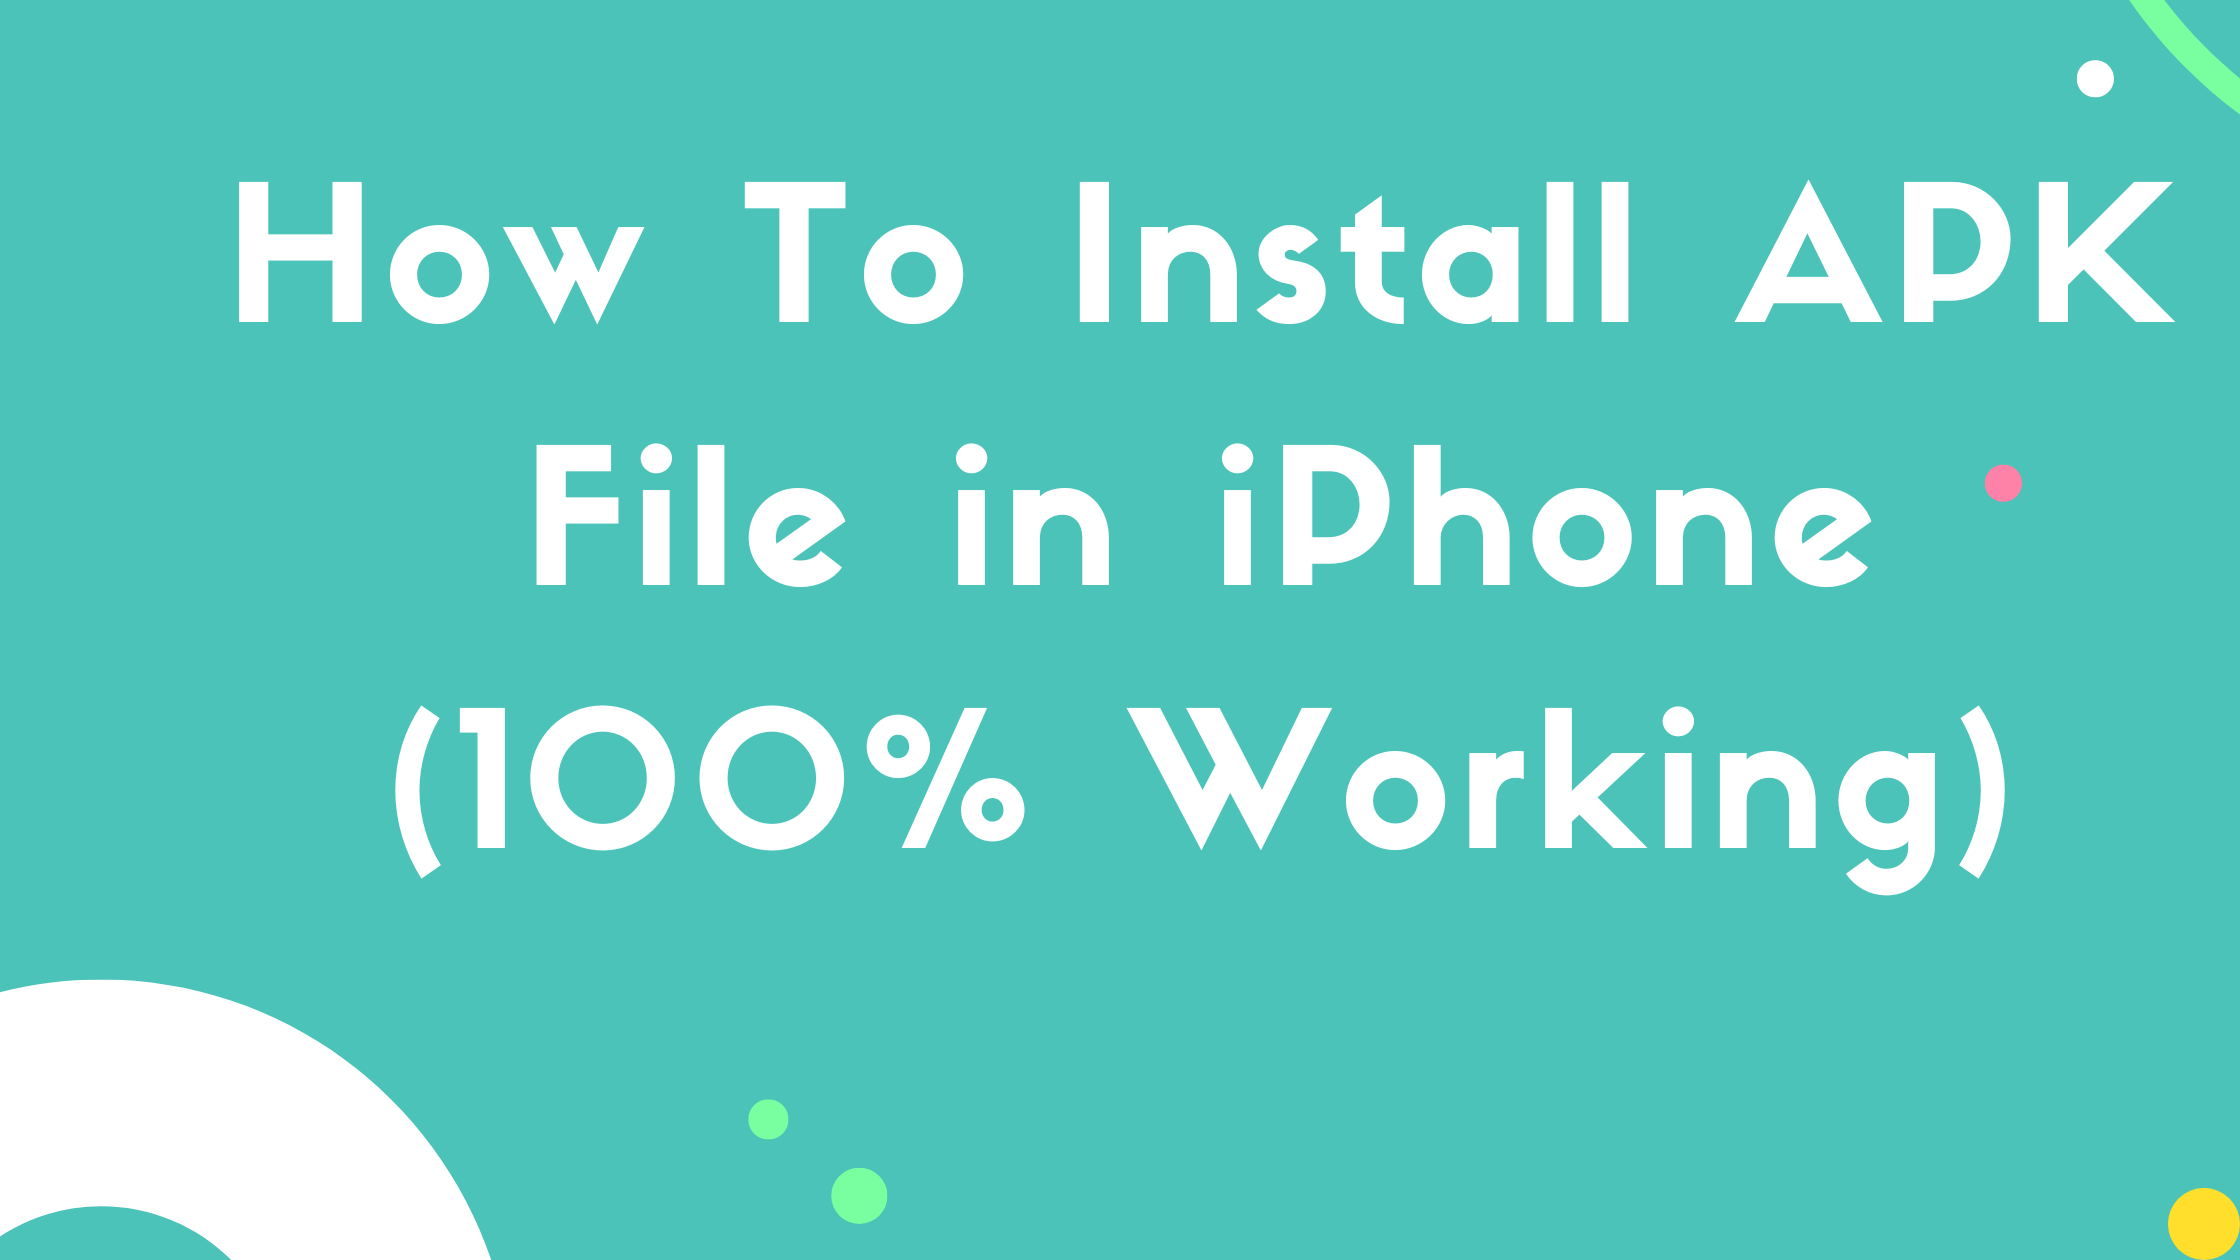 How To Install APK File in iPhone